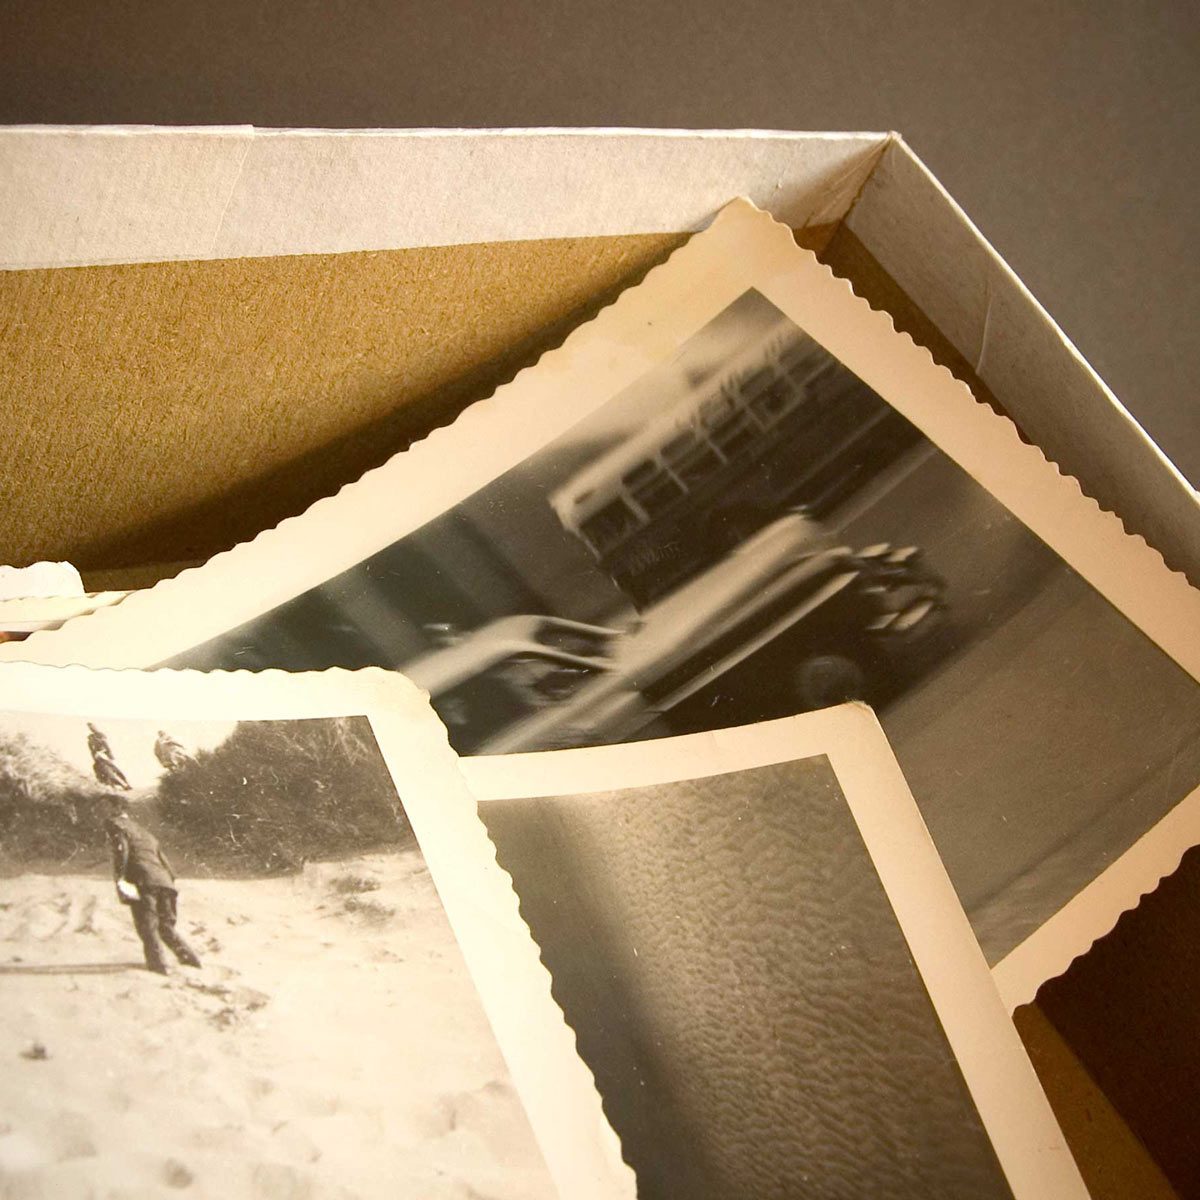 How to Preserve Old Photos: 7 Ways to Keep Antique Family Photos Looking Their Best